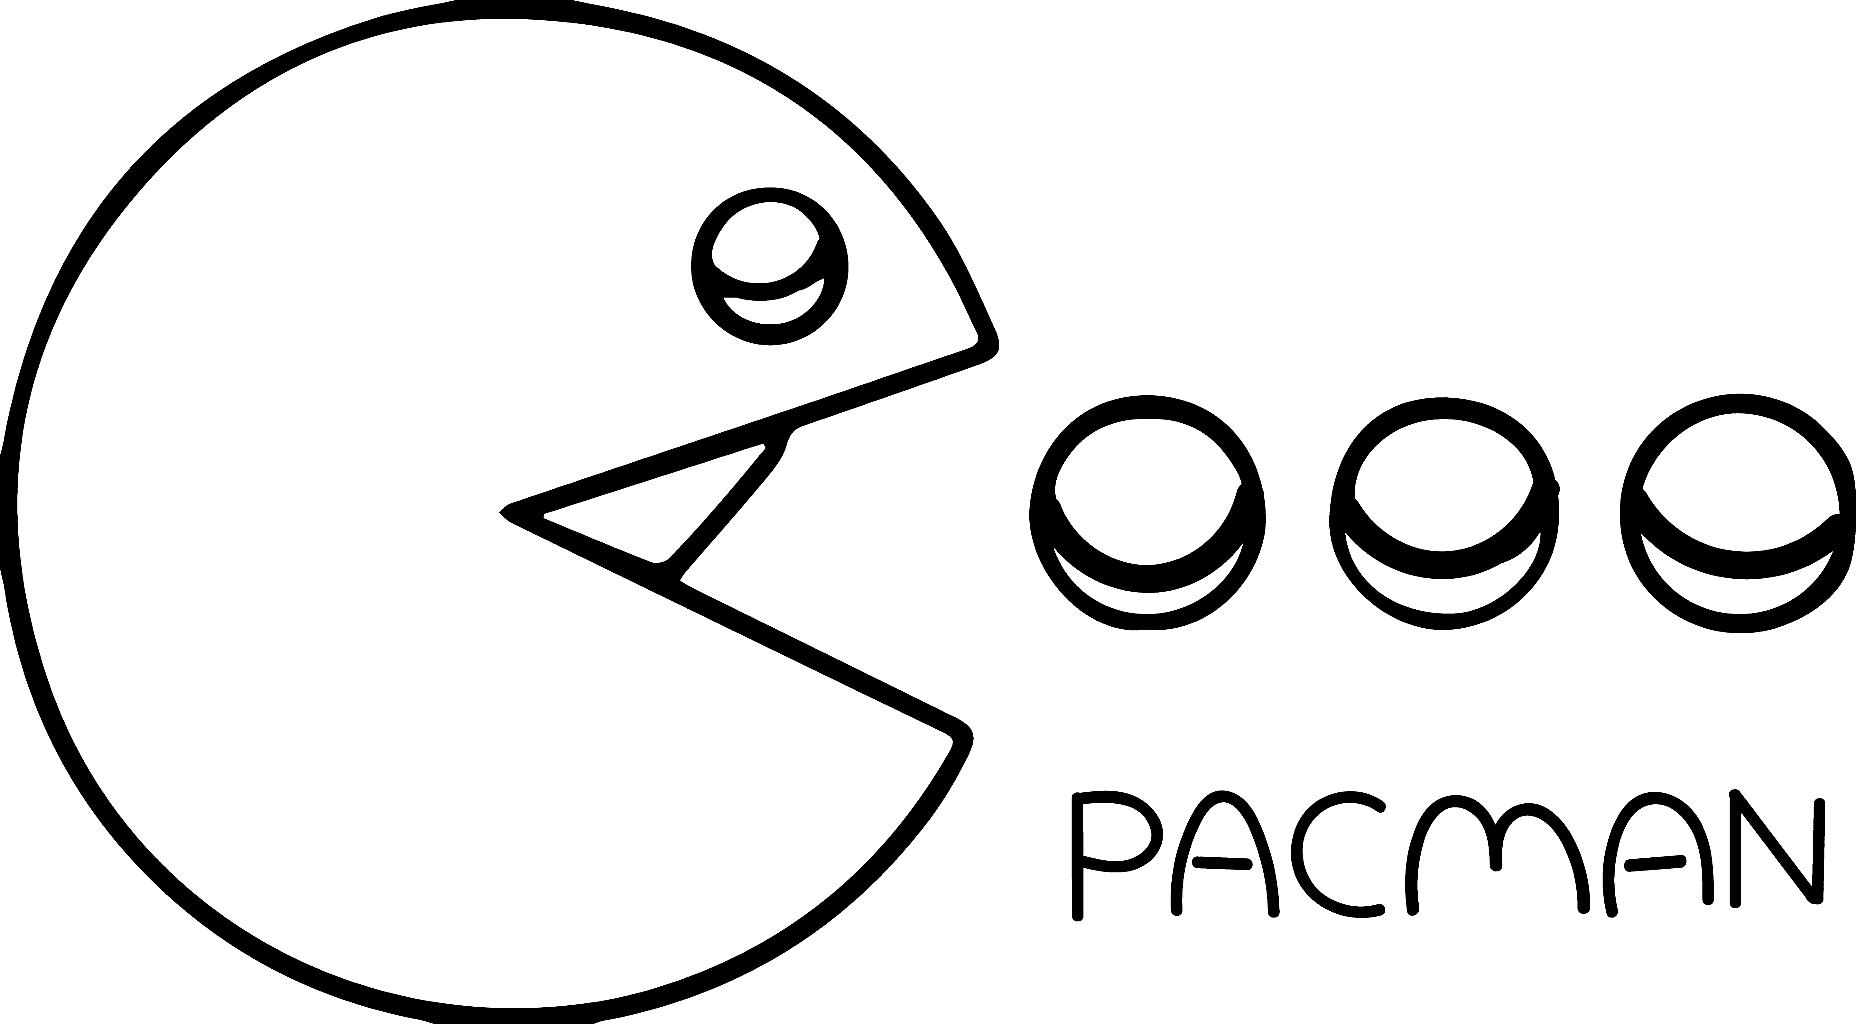 Pacman Coloring Page